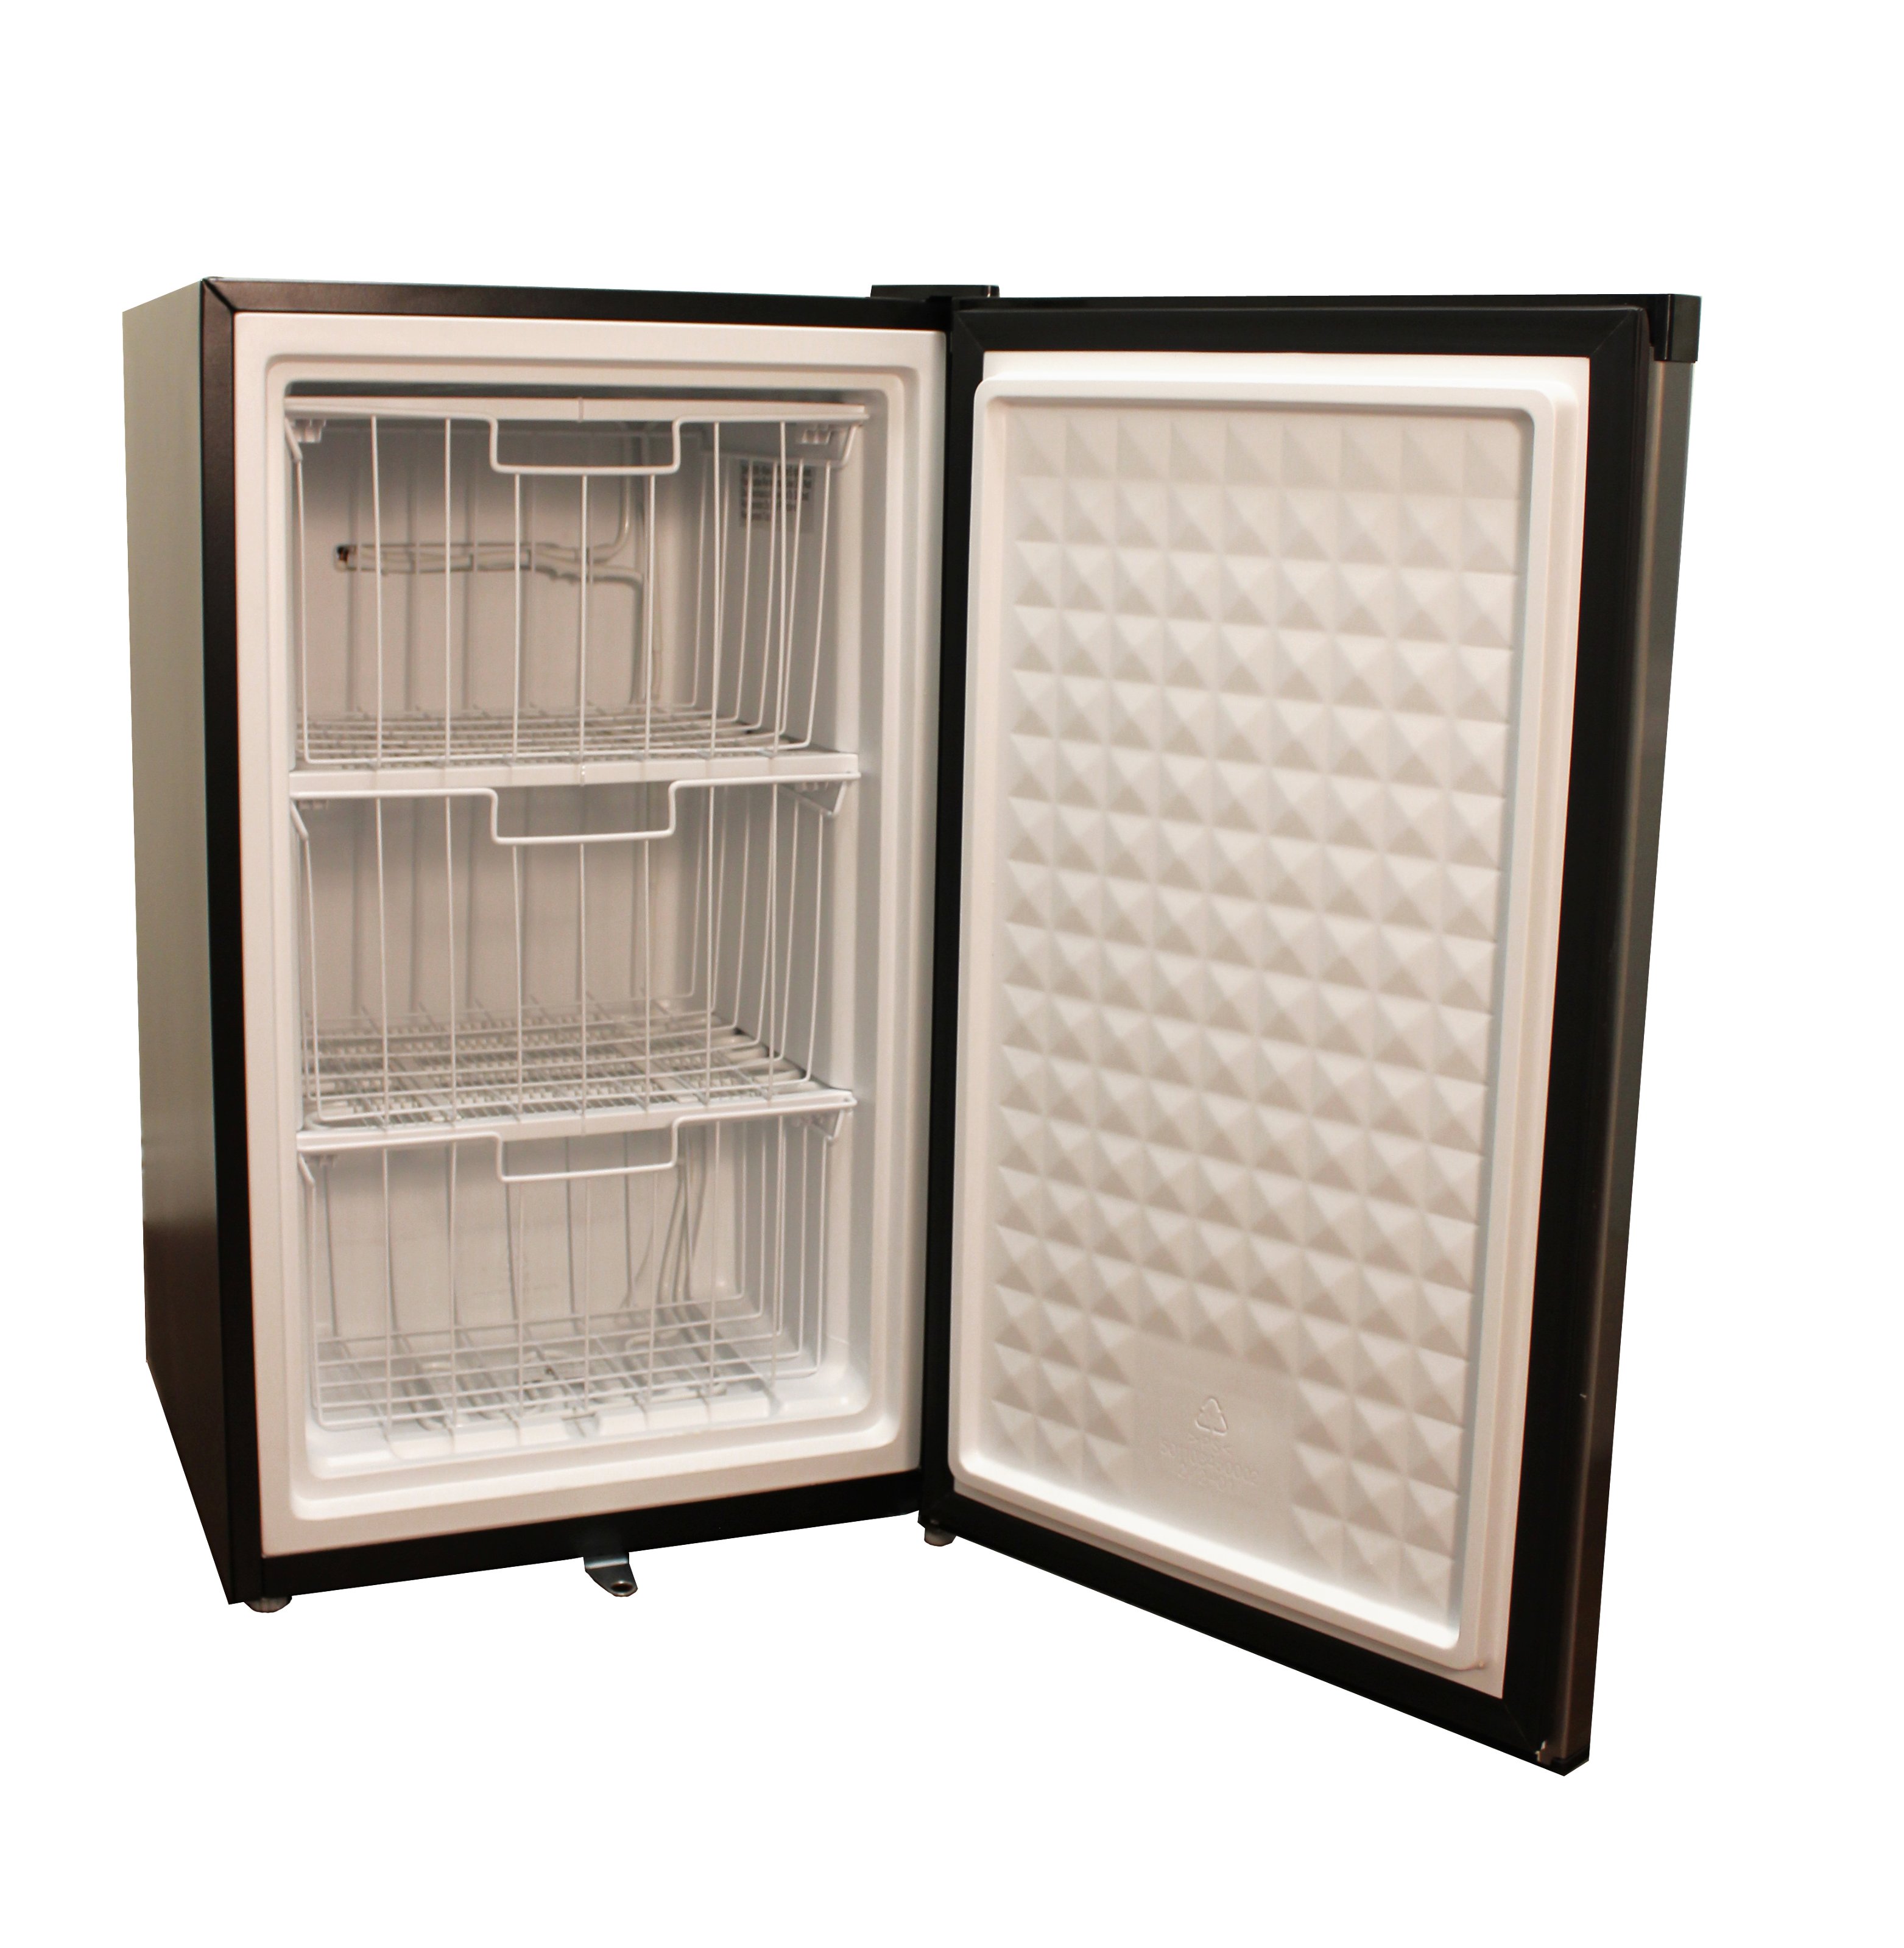 Angle View: GE - 14.1 Cu. Ft. Frost-Free Upright Freezer - White